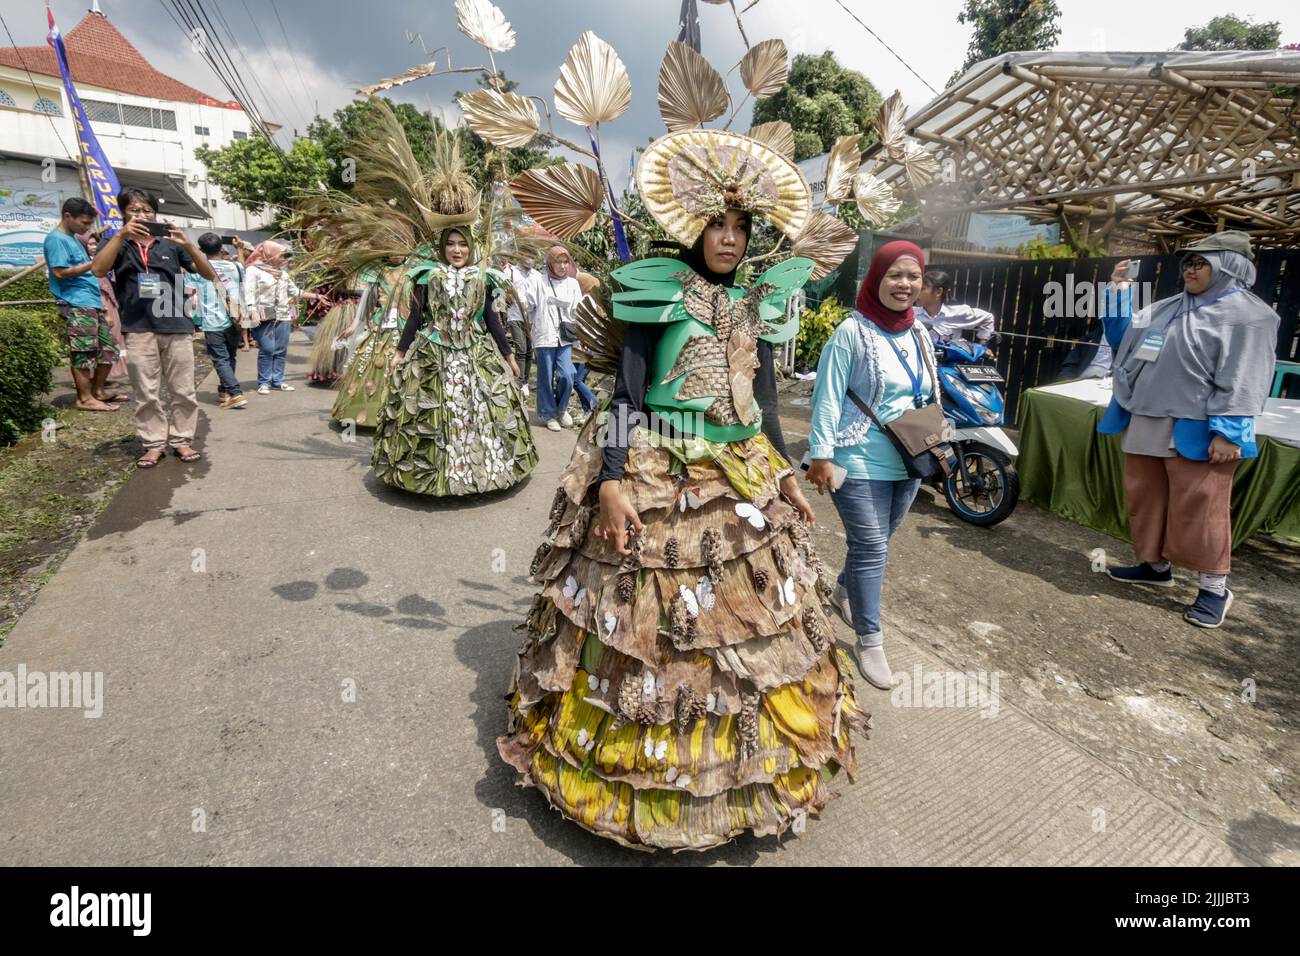 A woman in nature dress made from leaves, flowers, roots, participate in a nature fashion parade 'Back To Nature Cultural Preservation' Stock Photo